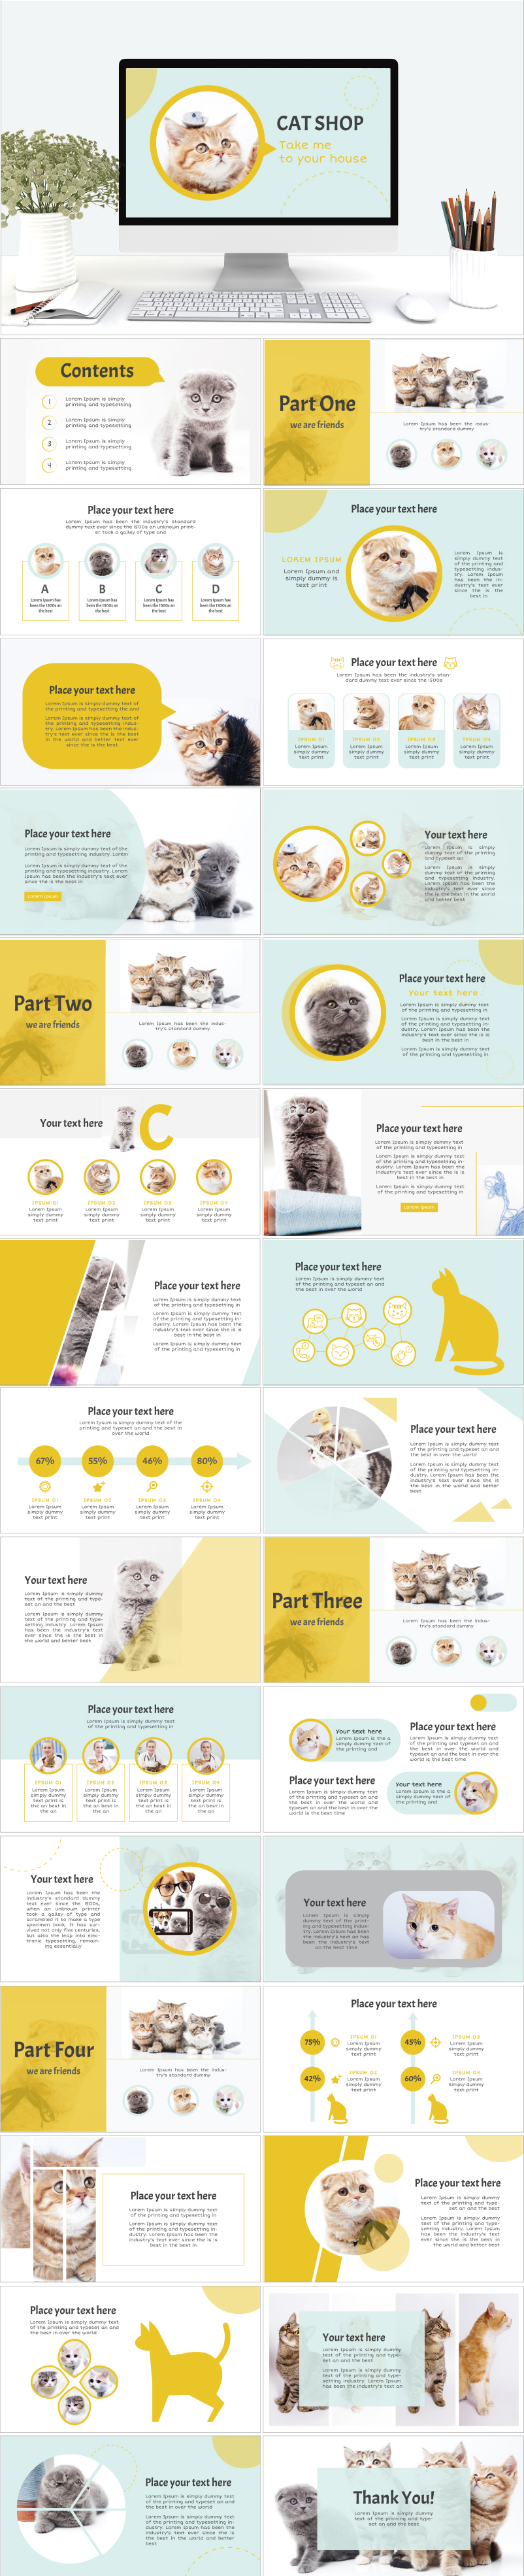 PowerPoint template vol. 18